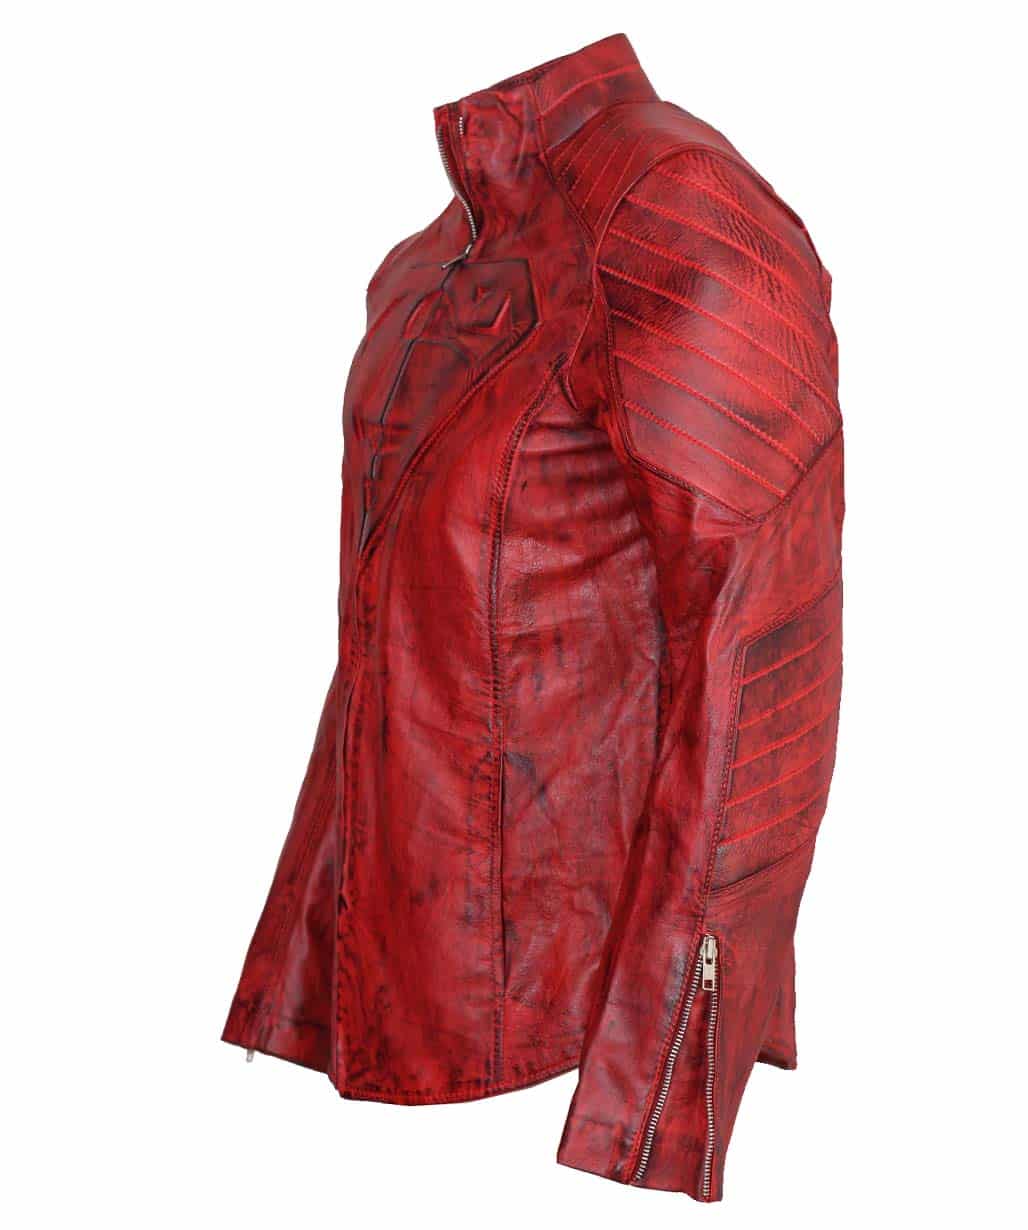 superman-red-waxed-leather-jacket-outfit-usa